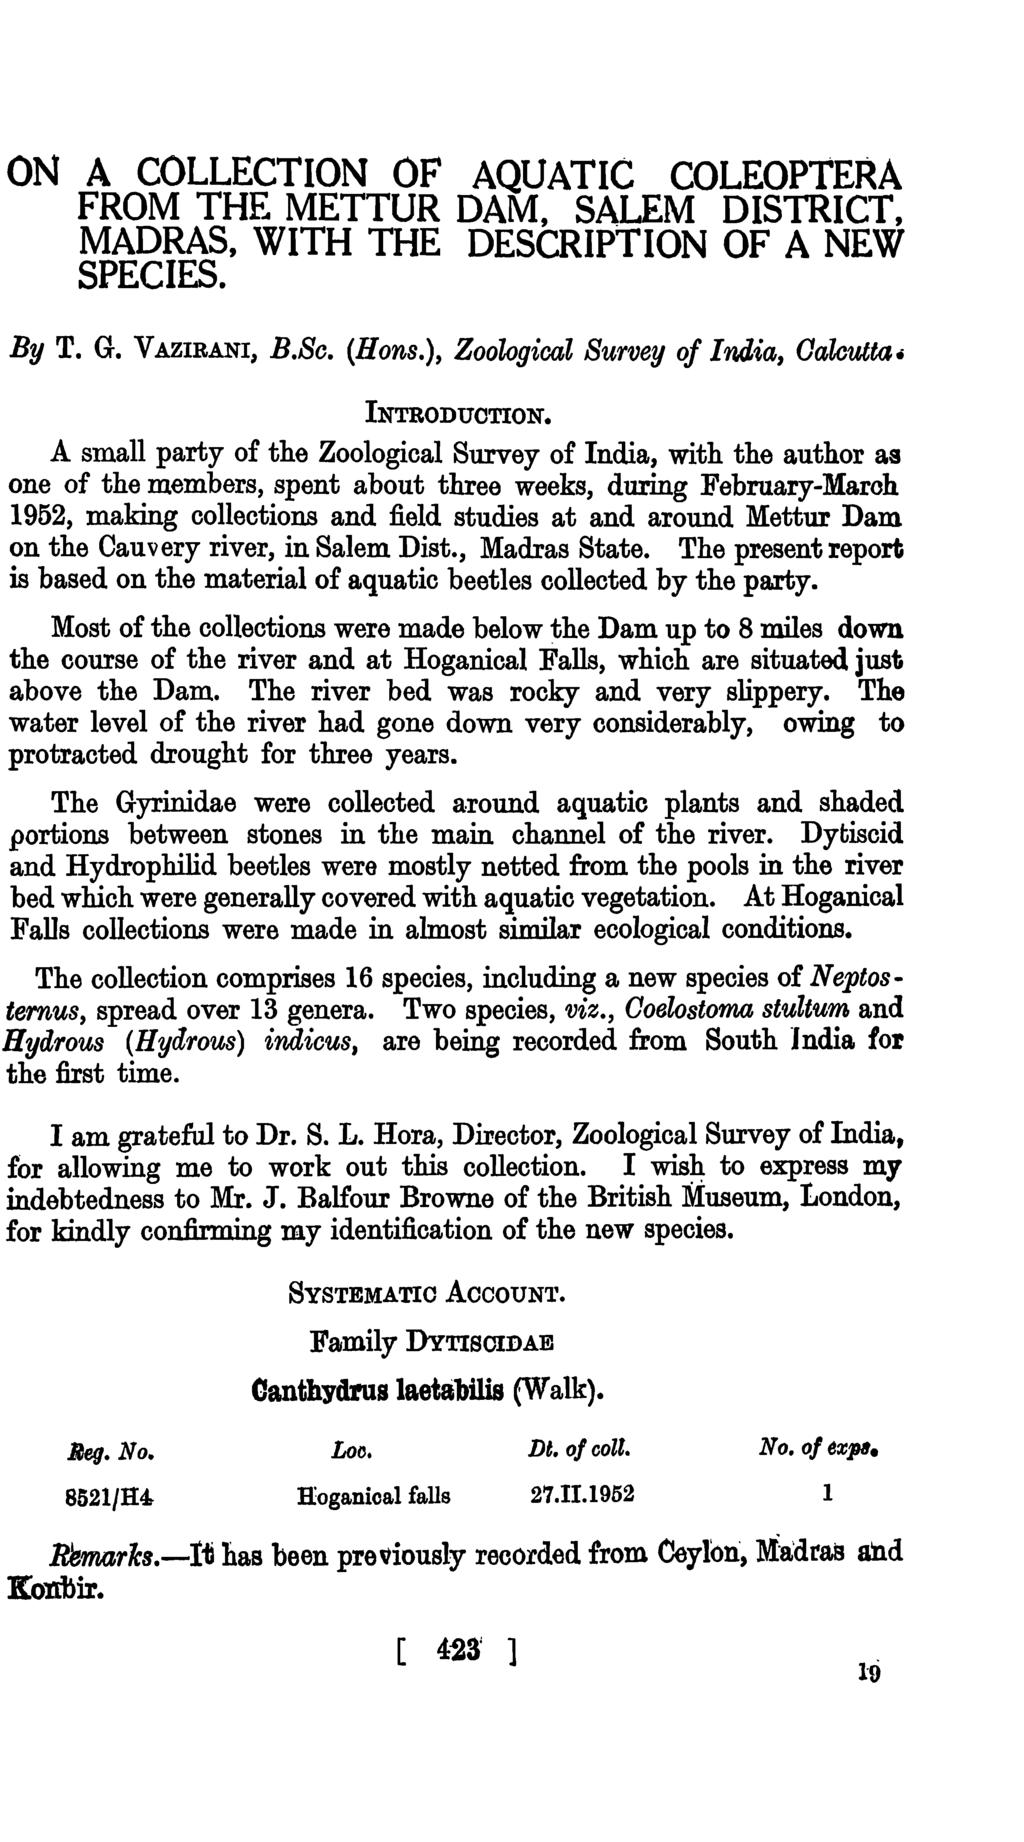 ON A COLLECTION OF AQUATIC COLEOPTERA FROM THE METTUR DAM, SALEM DISTRICT, MADRAS, WITH THE DESCRIPTION OF A NEW SPECIES. By T. G. VAZIRANI B.Se. (Hans.), Zoological Survey of India, Oawutta.